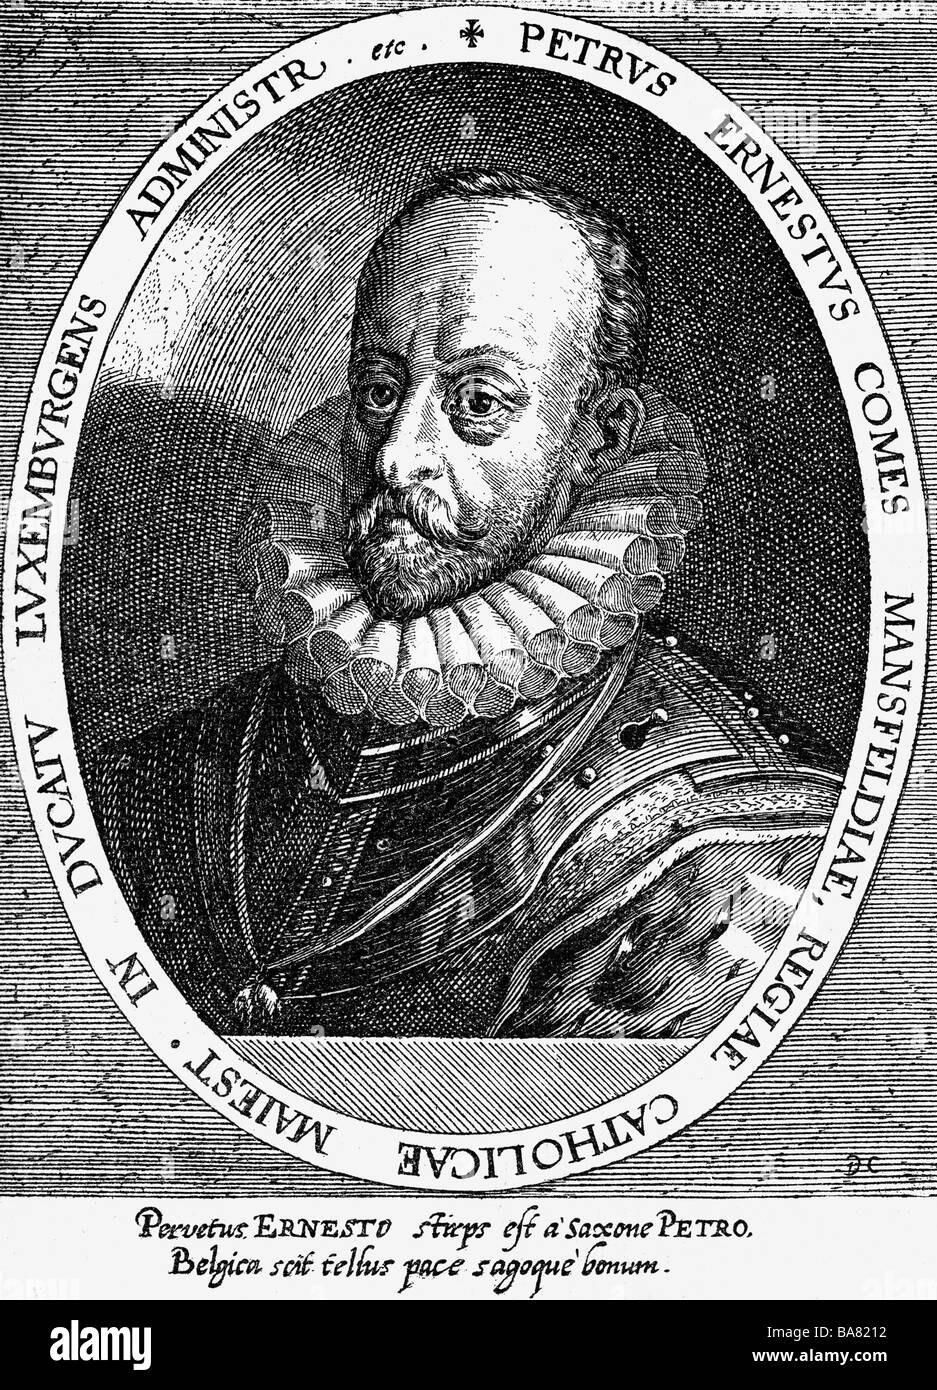 Mansfeld, Peter Ernst I count of, 12.8.1517 - 23.5.1604, German general, Governeur of Luxembourg 1545 - 1604, portrait, copper engraving, late 16th century, , Artist's Copyright has not to be cleared Stock Photo